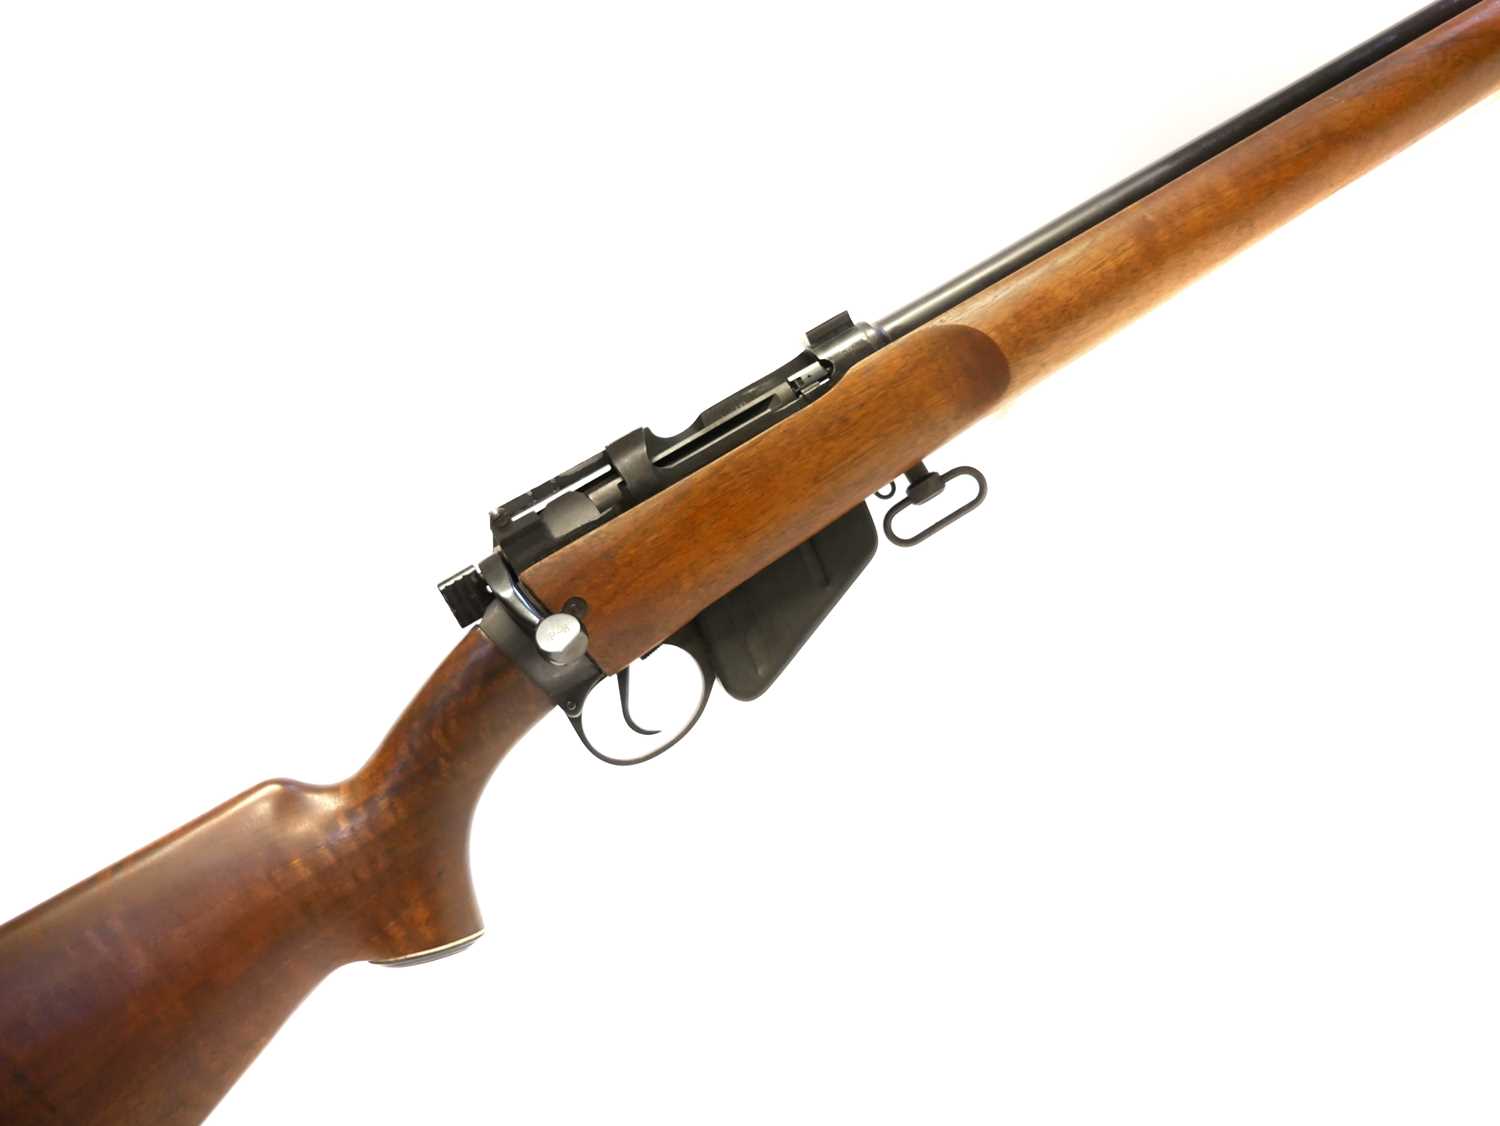 Parker Hale Model T4 bolt action 7.62x51 rifle, serial number 82, 26inch heavy profile barrel, the